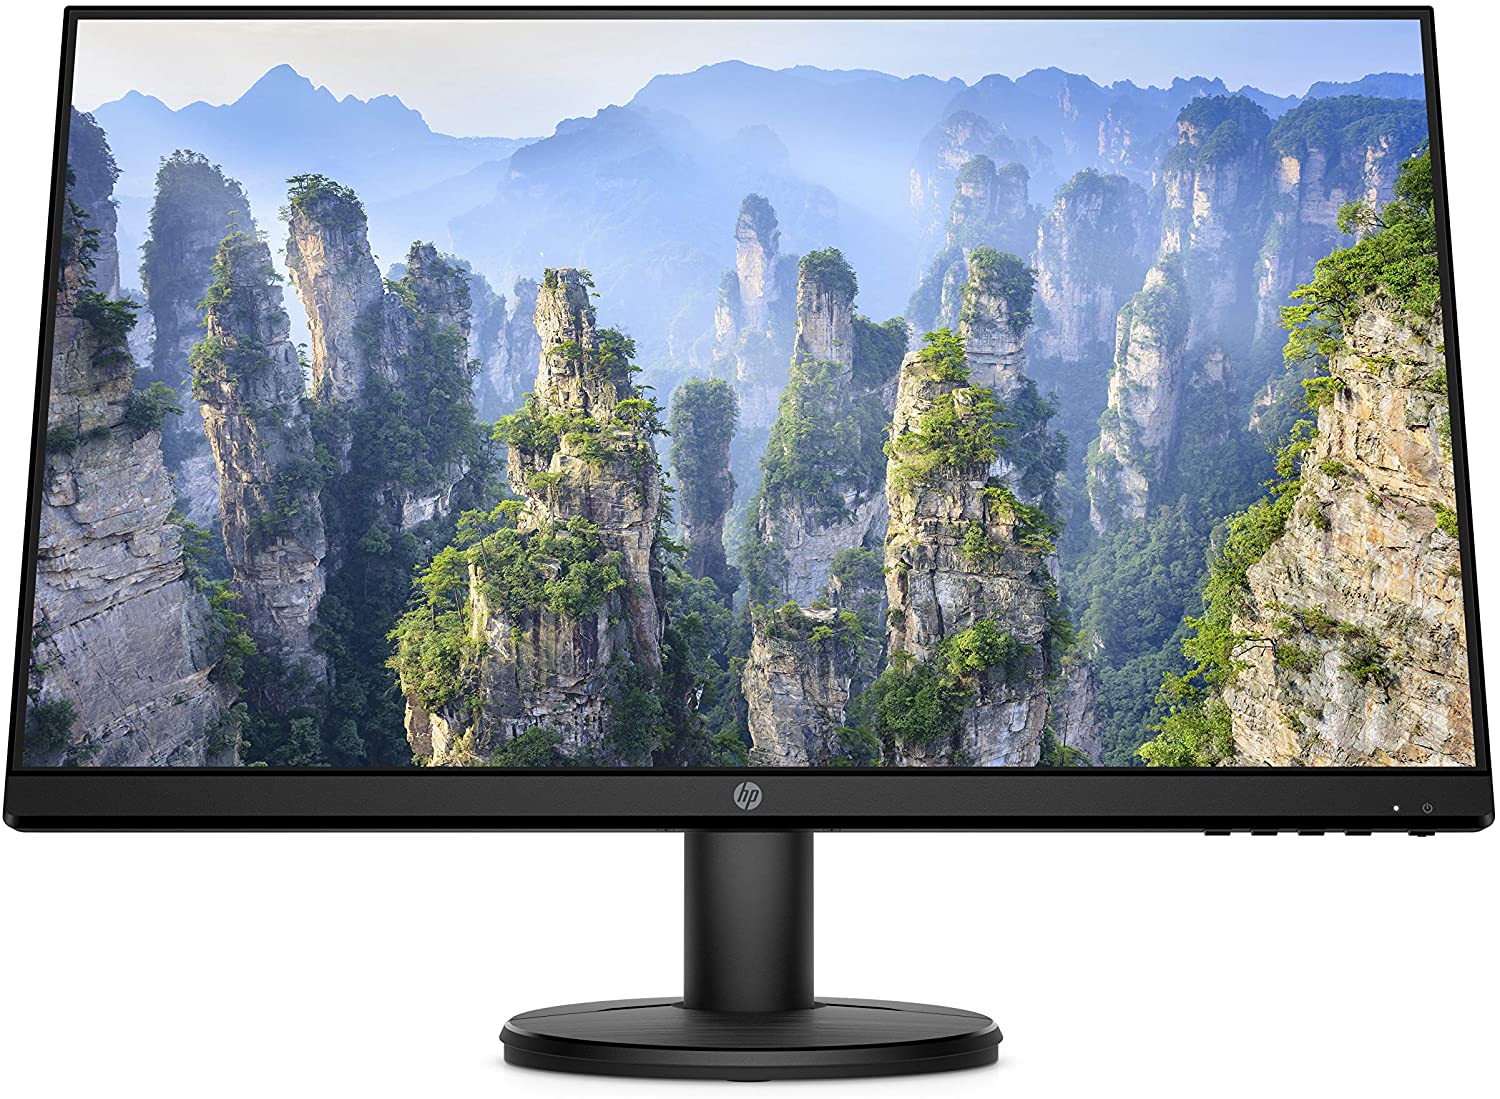 HP Monitor FHD V24i | 23.8-Inch Diagonal Full HD Computer Monitor with IPS Panel and 3-Sided Micro-Edge Design | Low Blue Light Display (9RV15AA#ABA)0